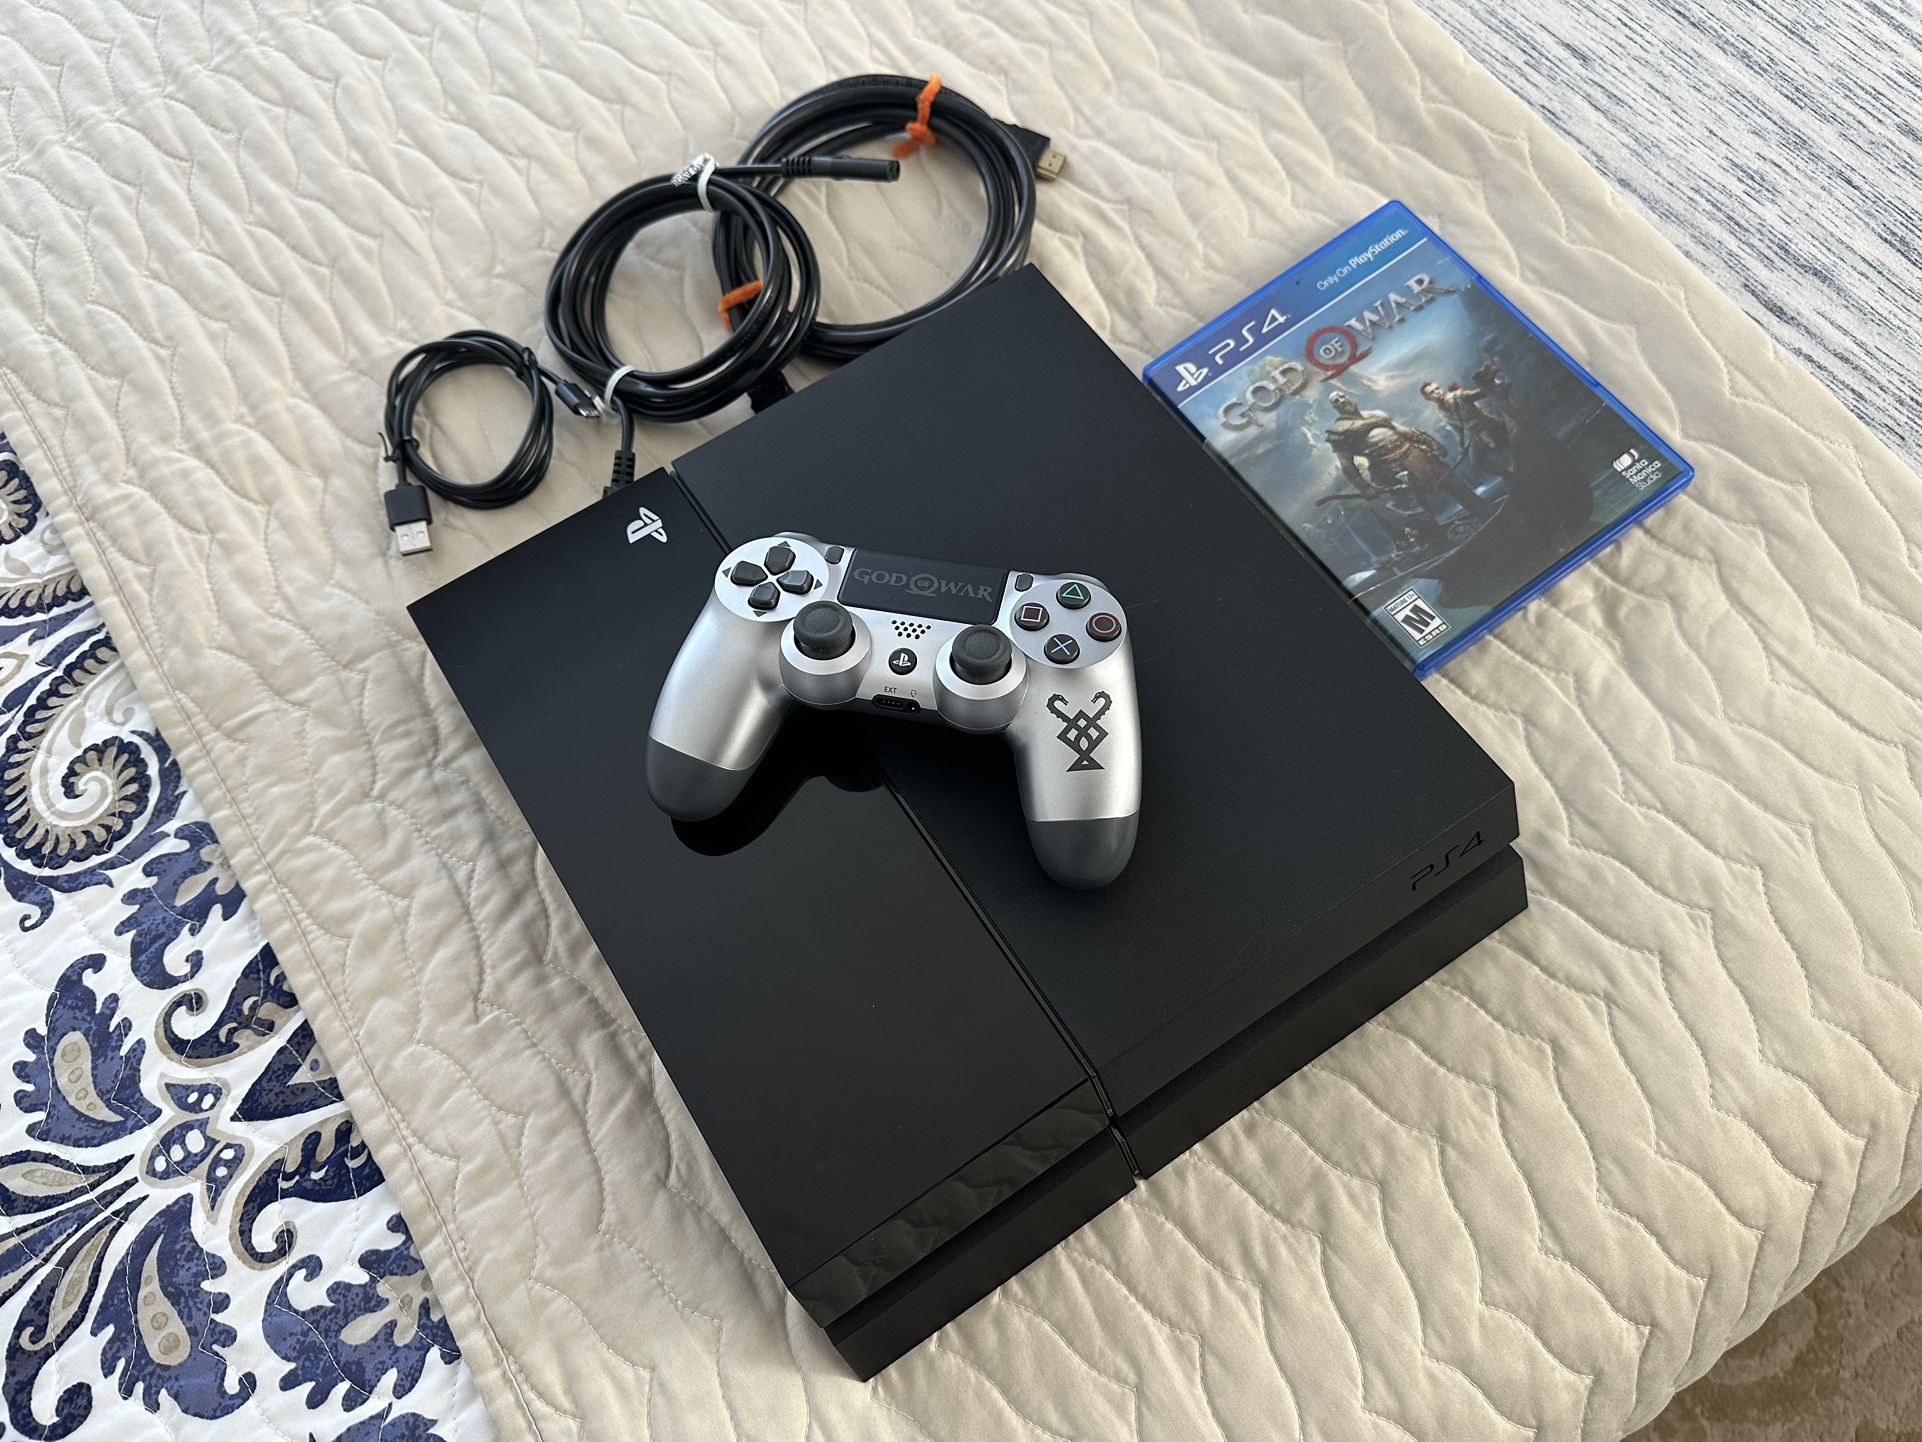 Black Sony PS4 Console.